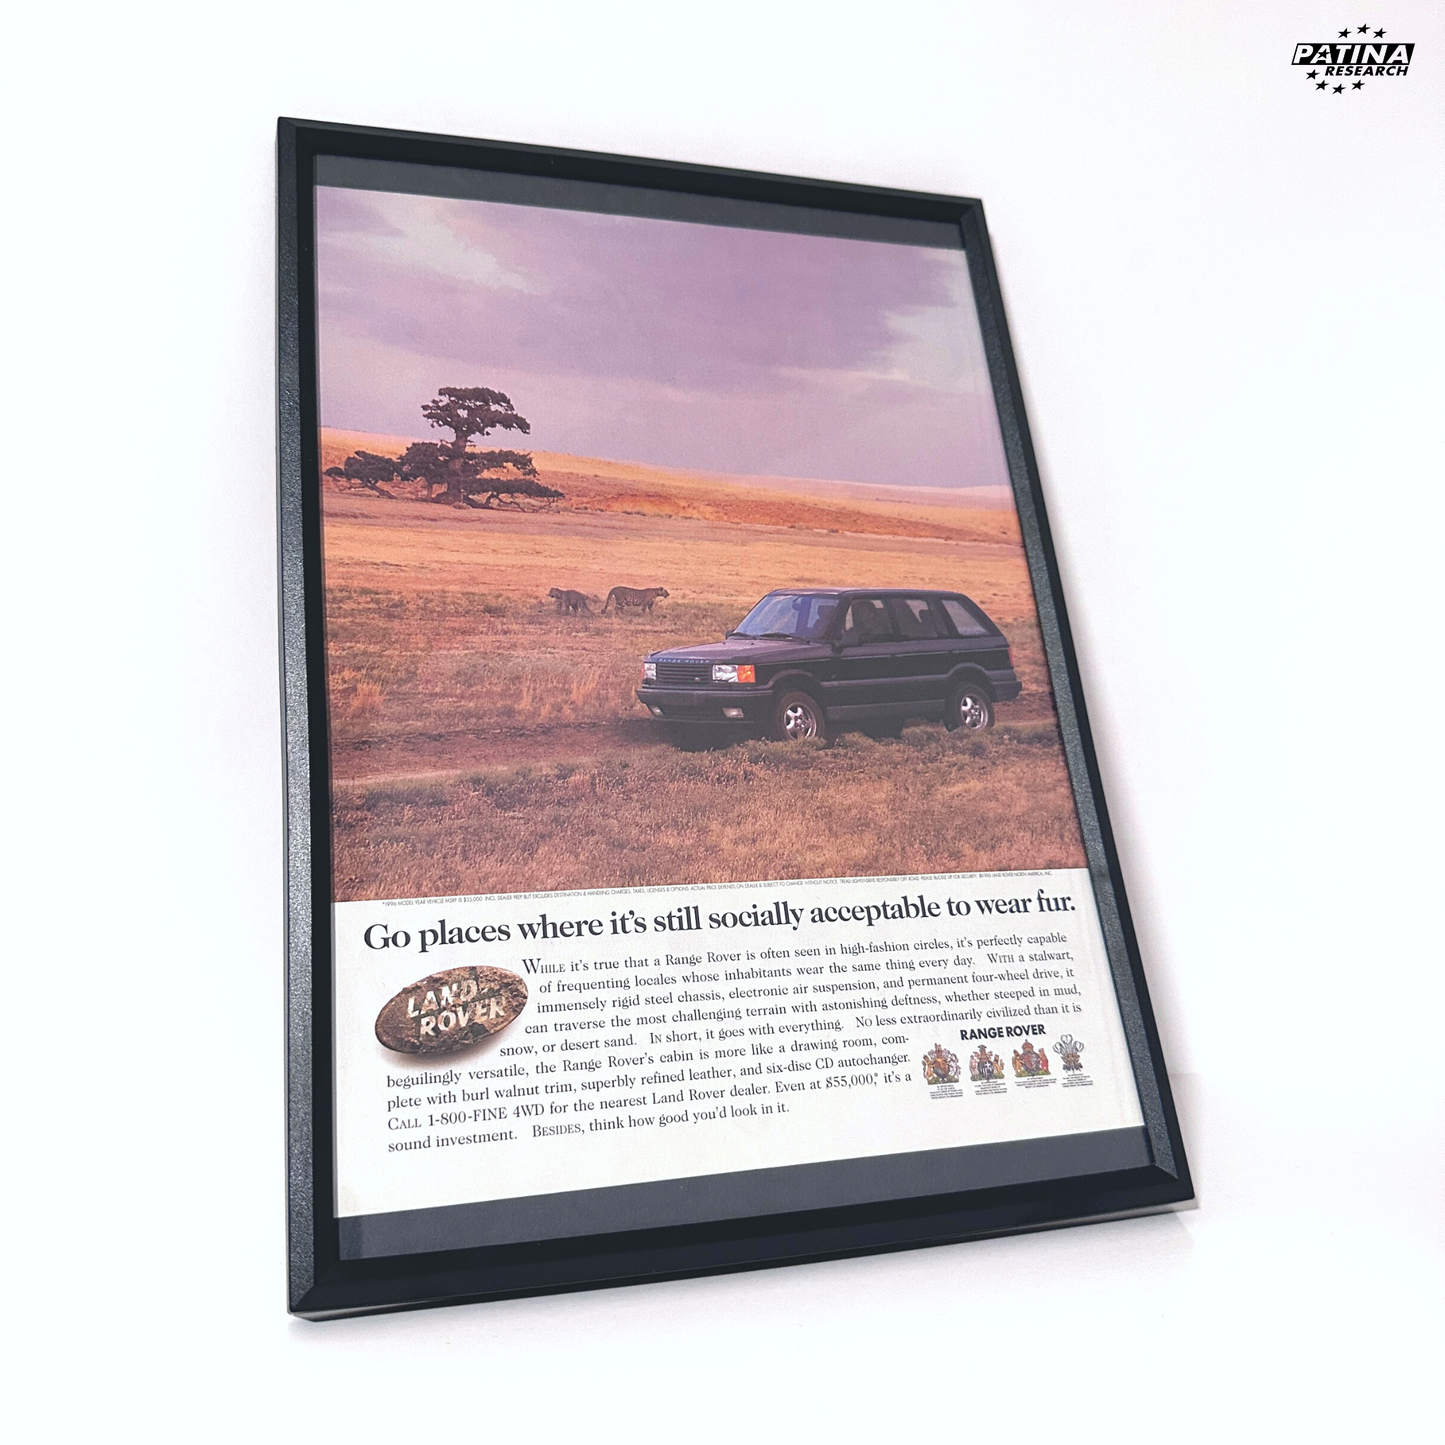 Land rover go places framed ad